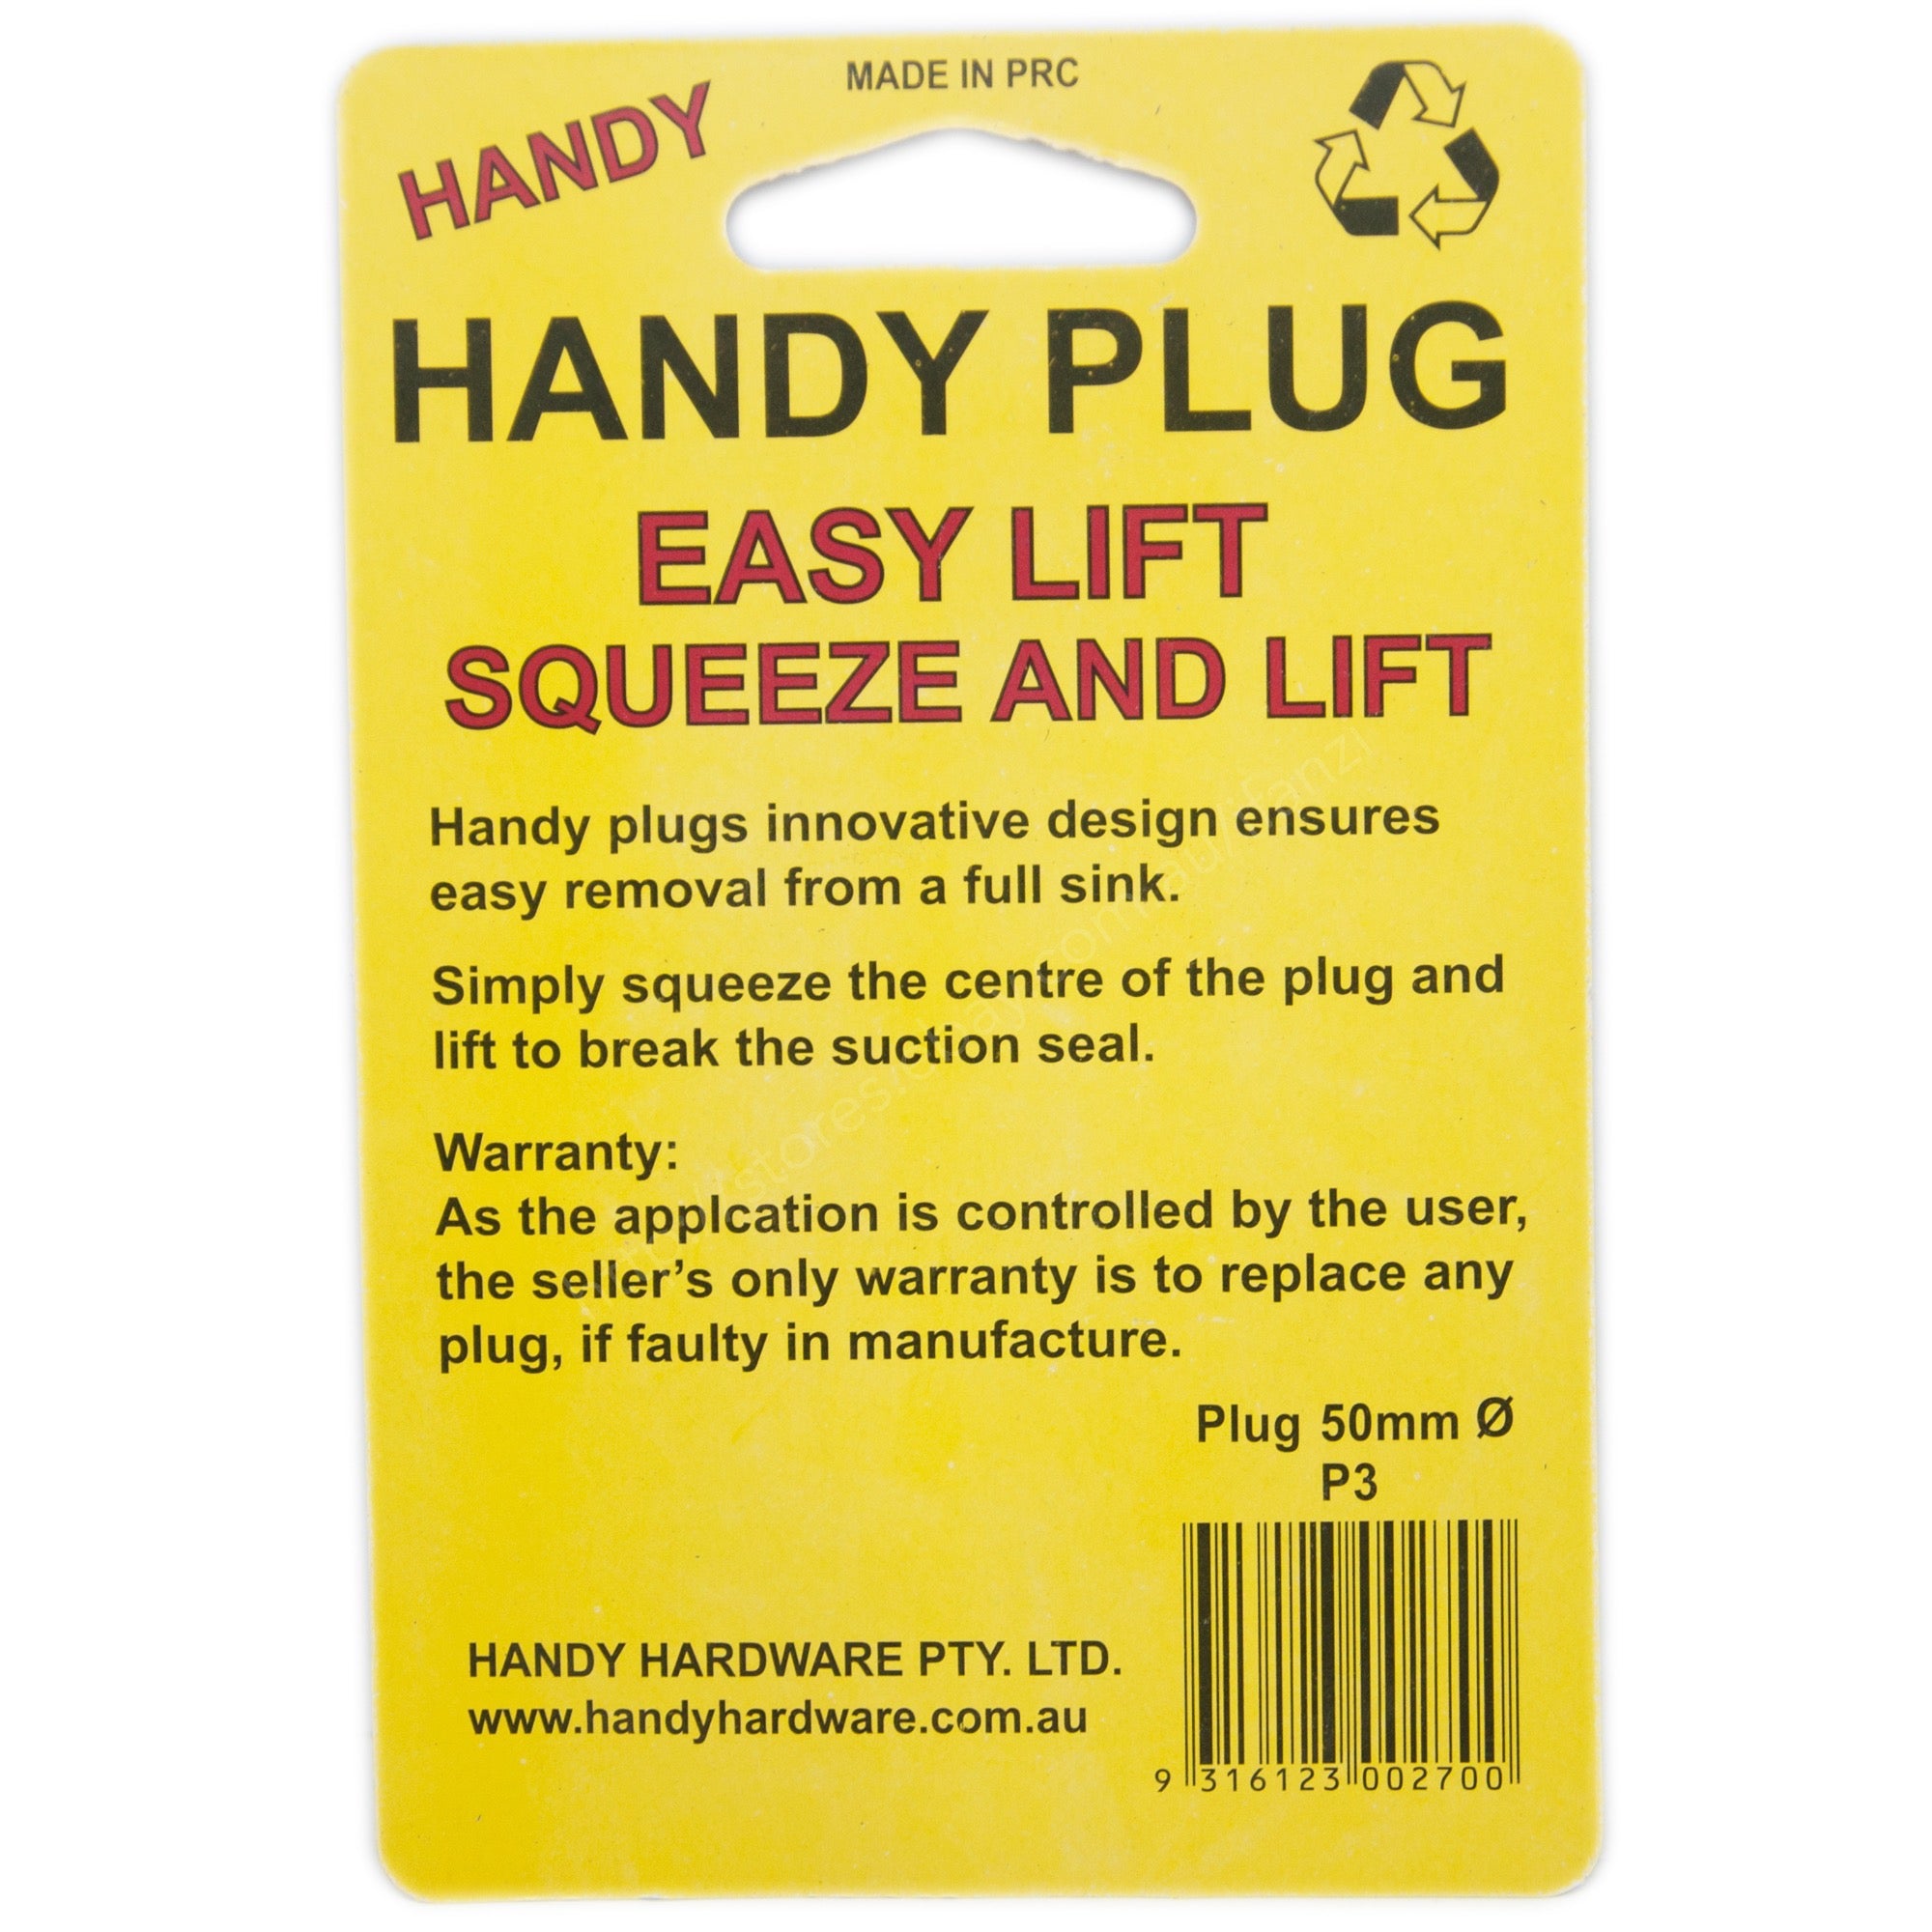 HANDY PRODUCT Handy Plug Easy Squeeze and Lift 50mm For Bath and Sink P3